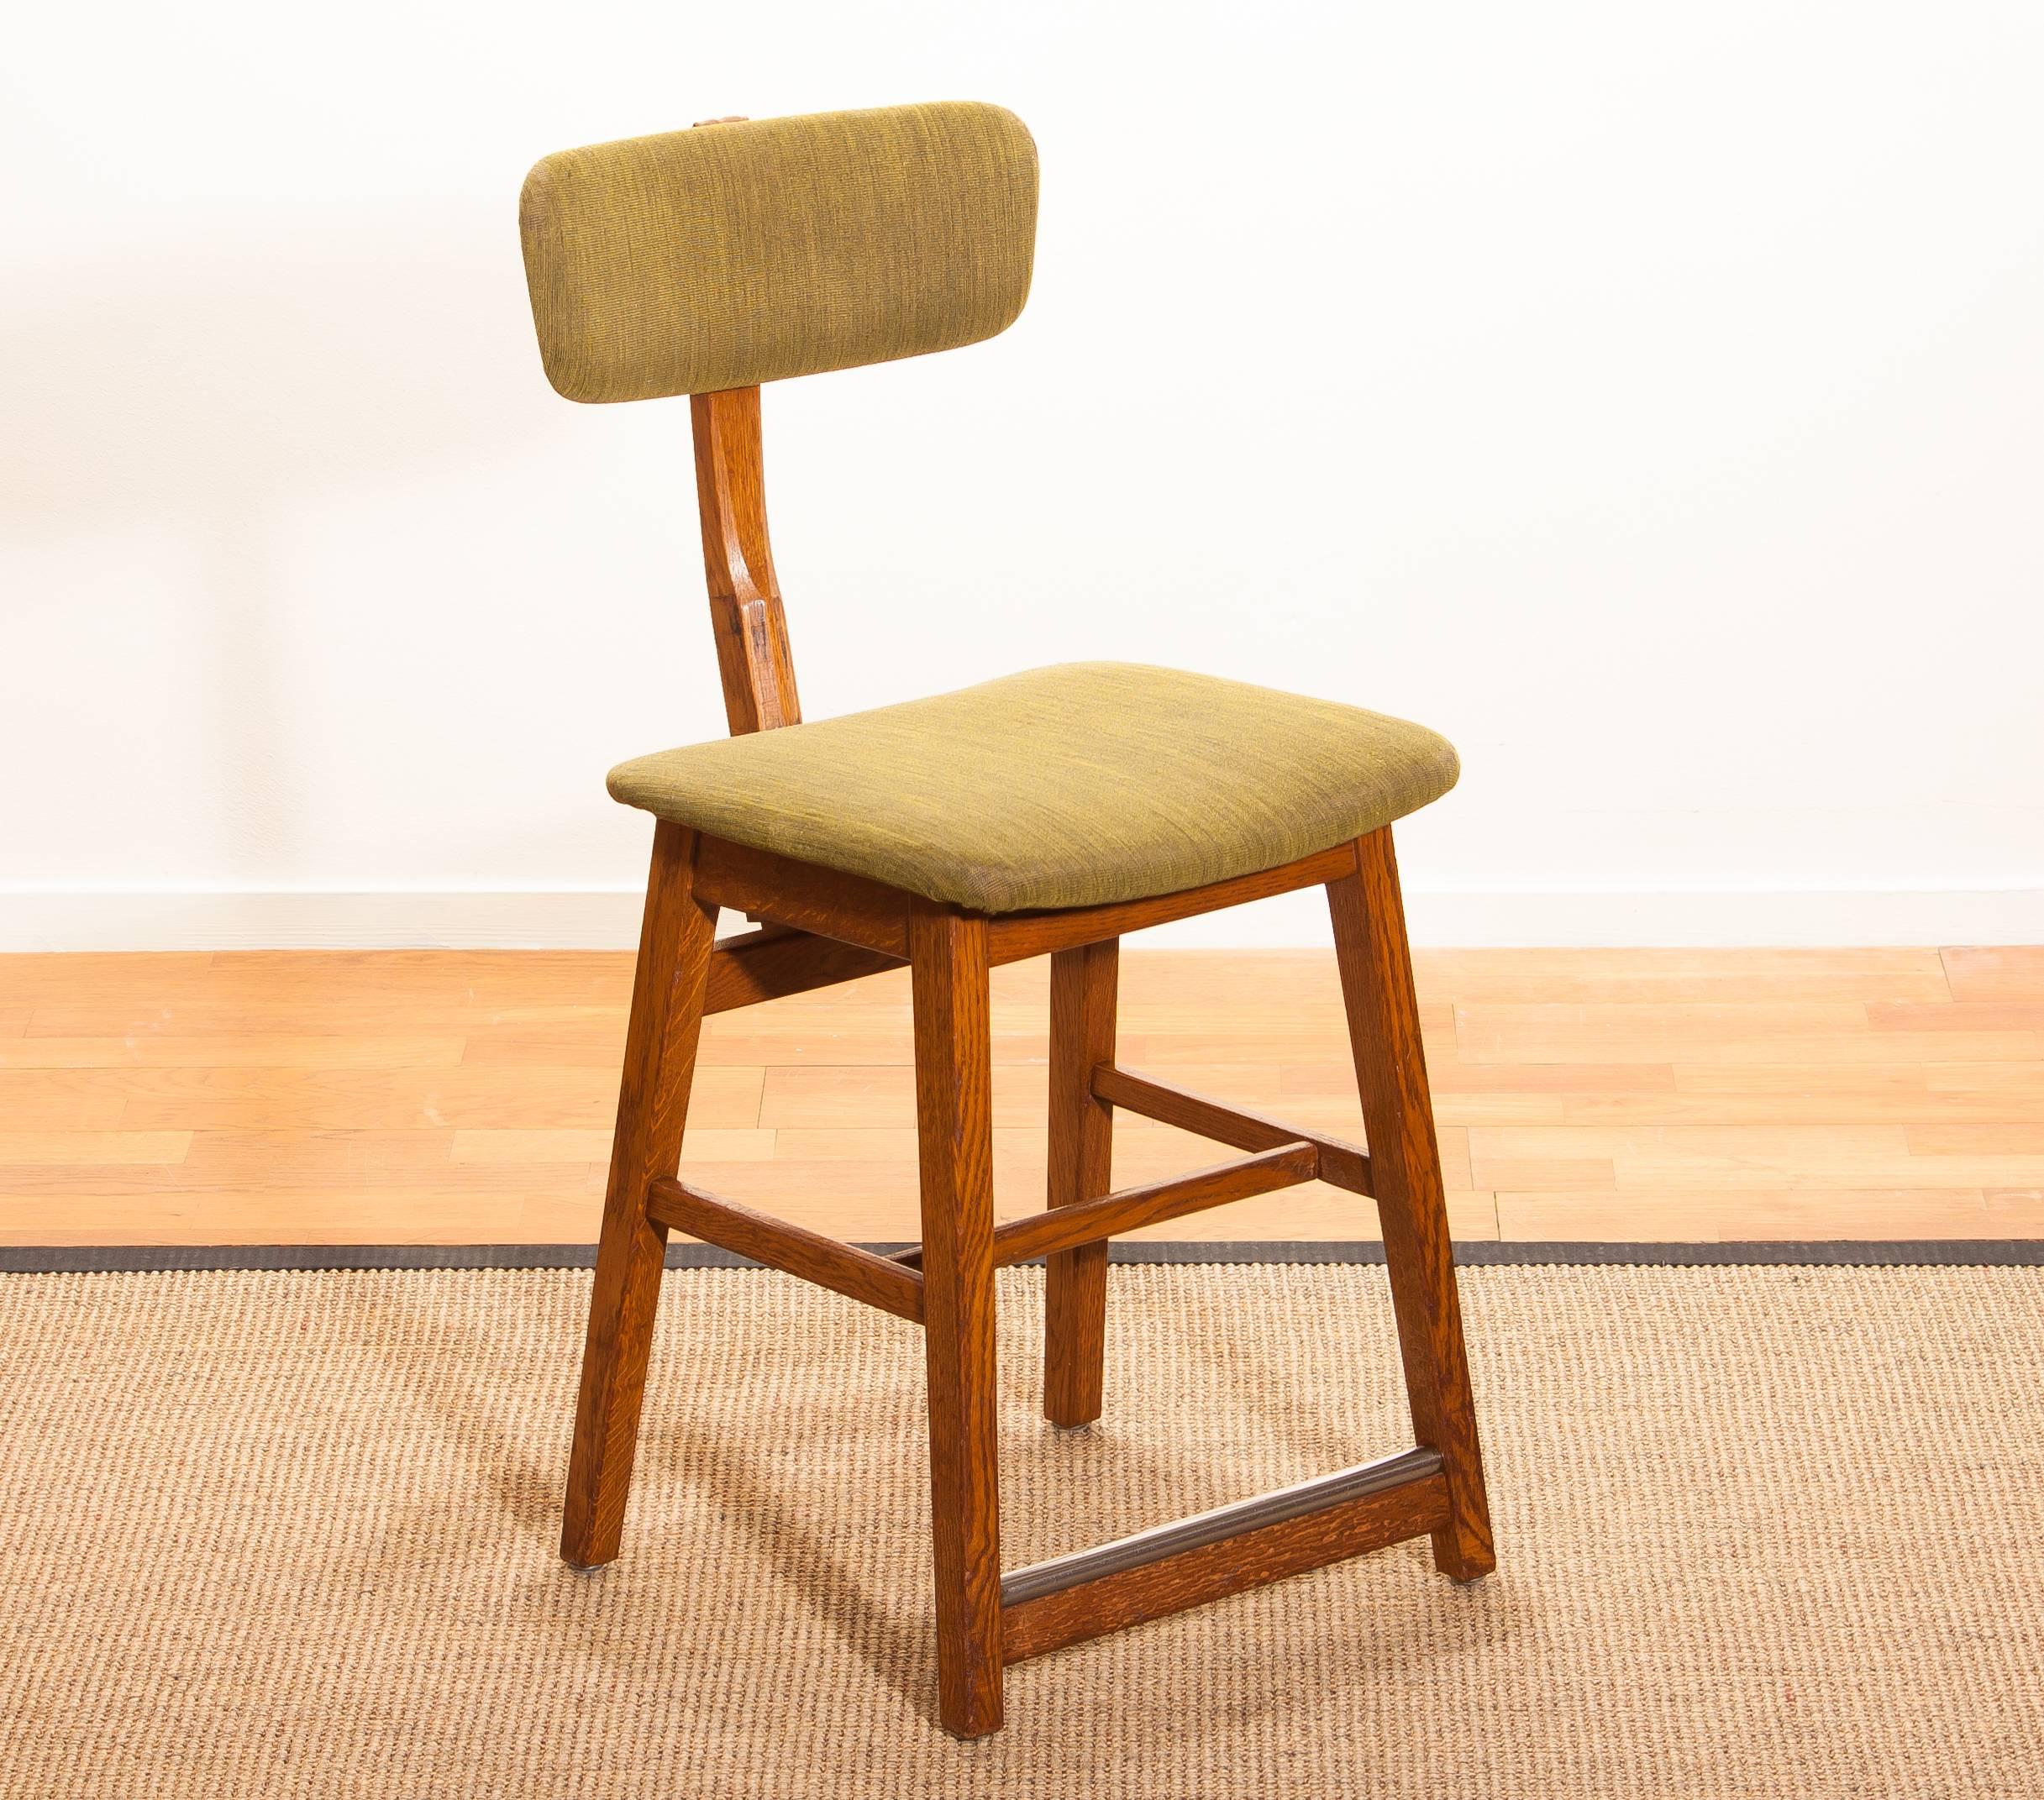 Mid-20th Century 1960s, Teak and Wool Desk Chair by Âtvidabergs Sweden